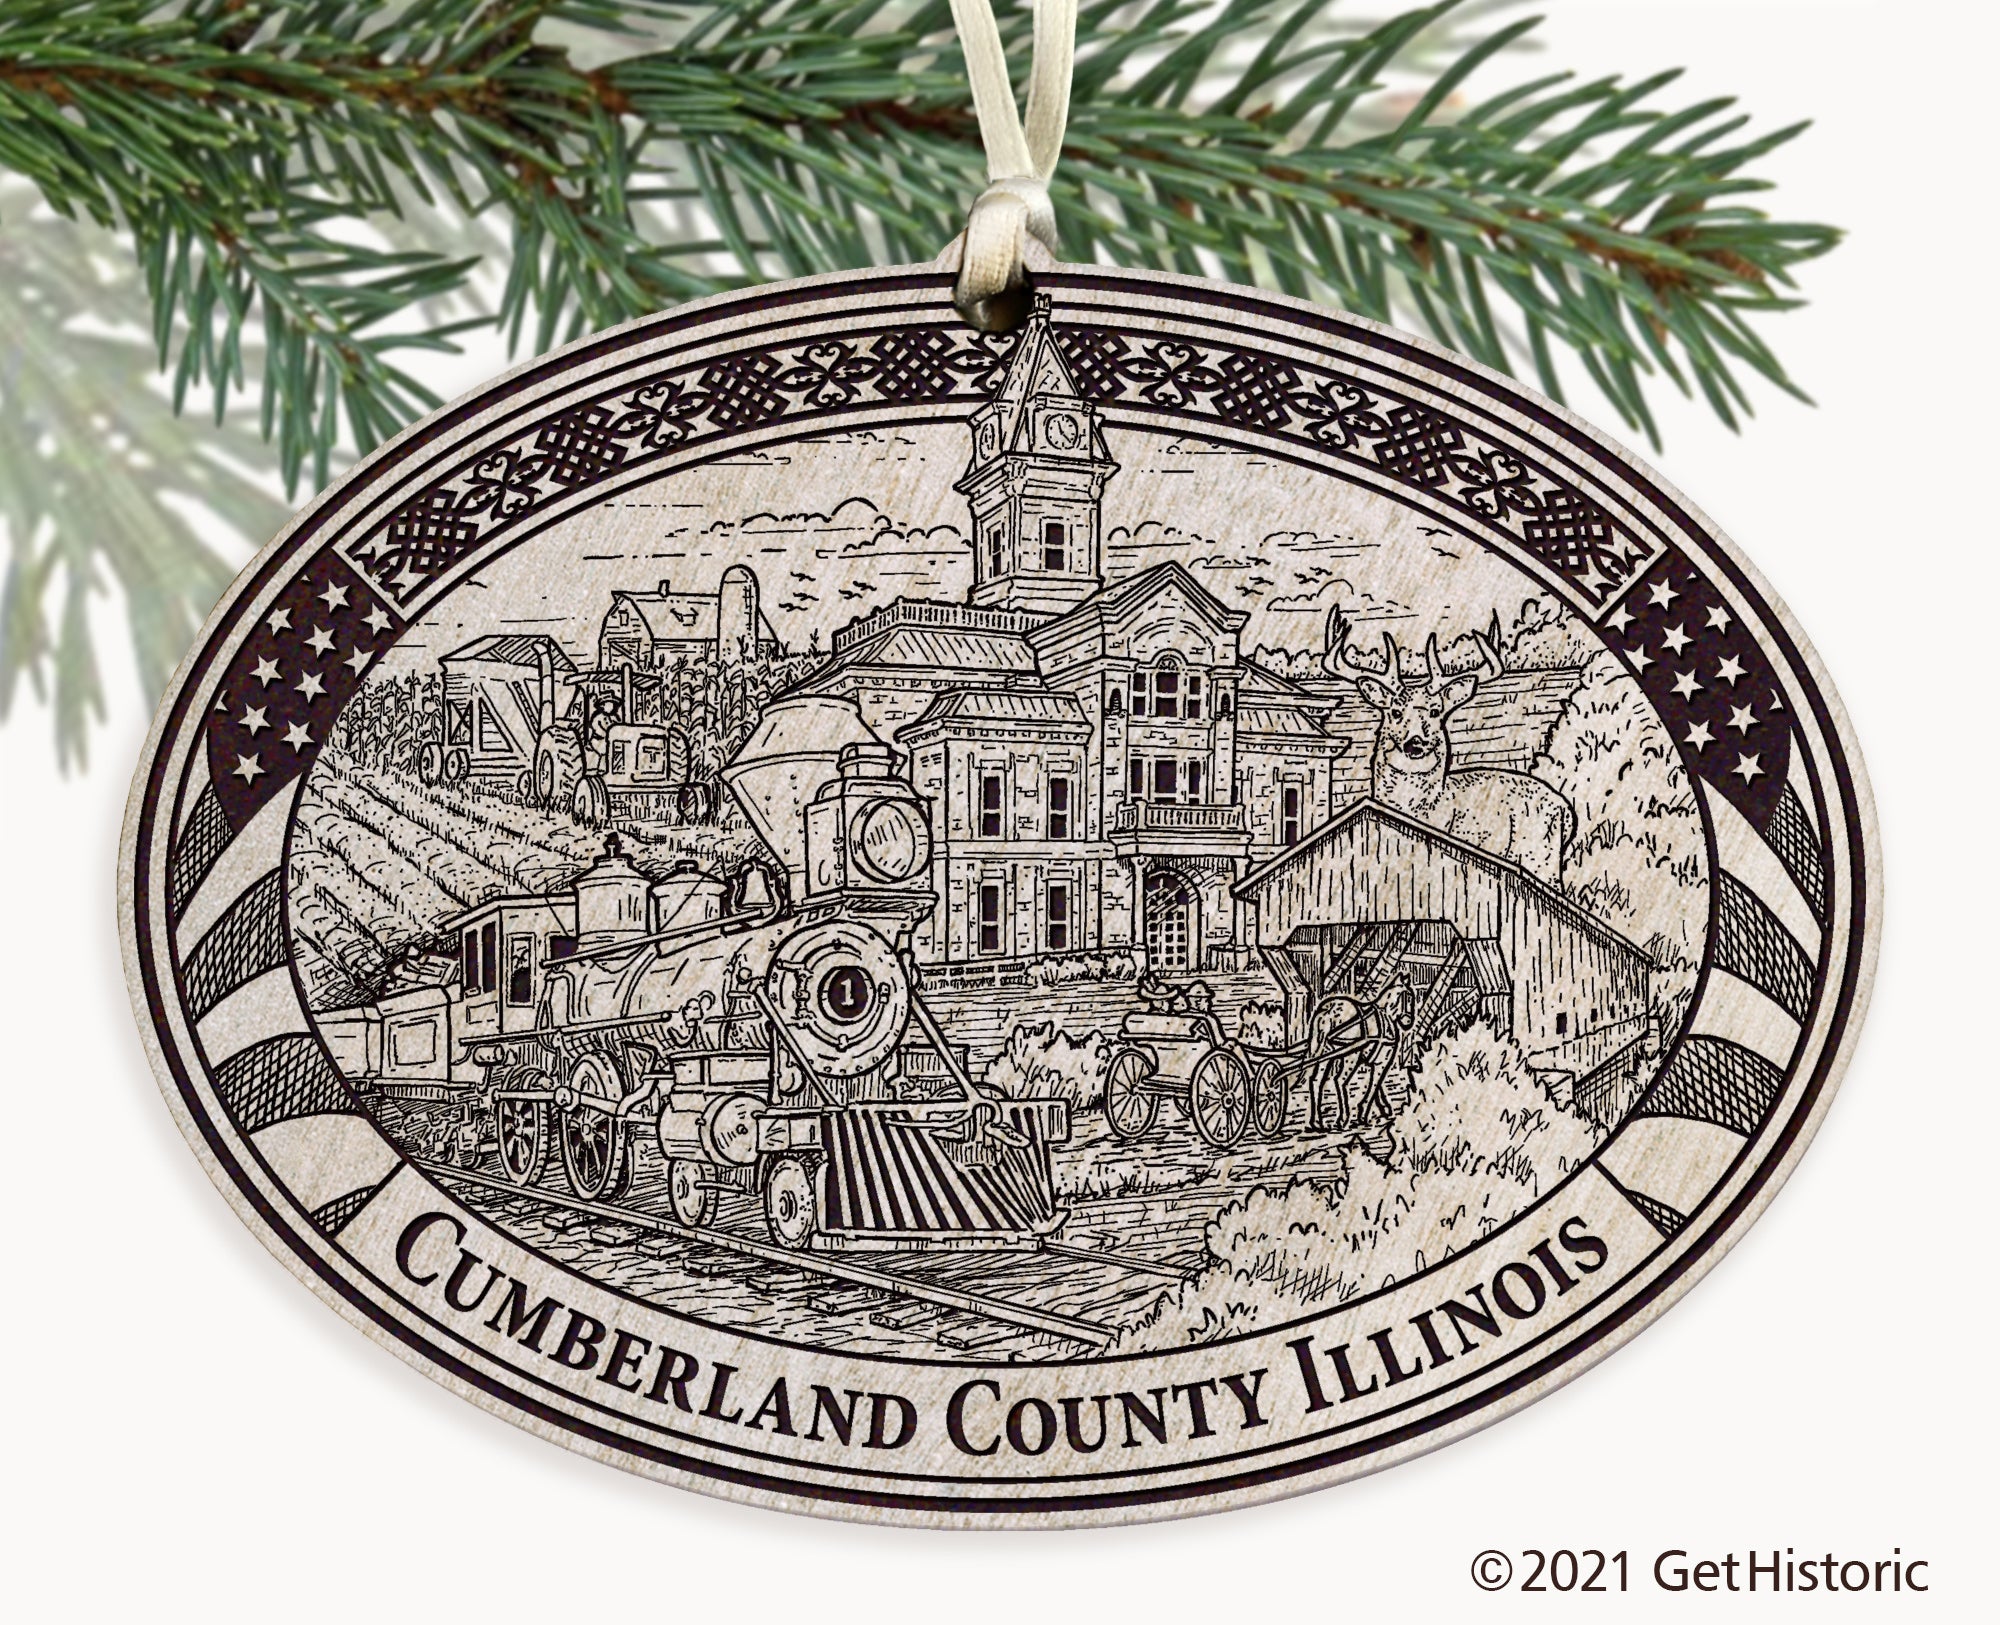 Cumberland County Illinois Engraved Ornament